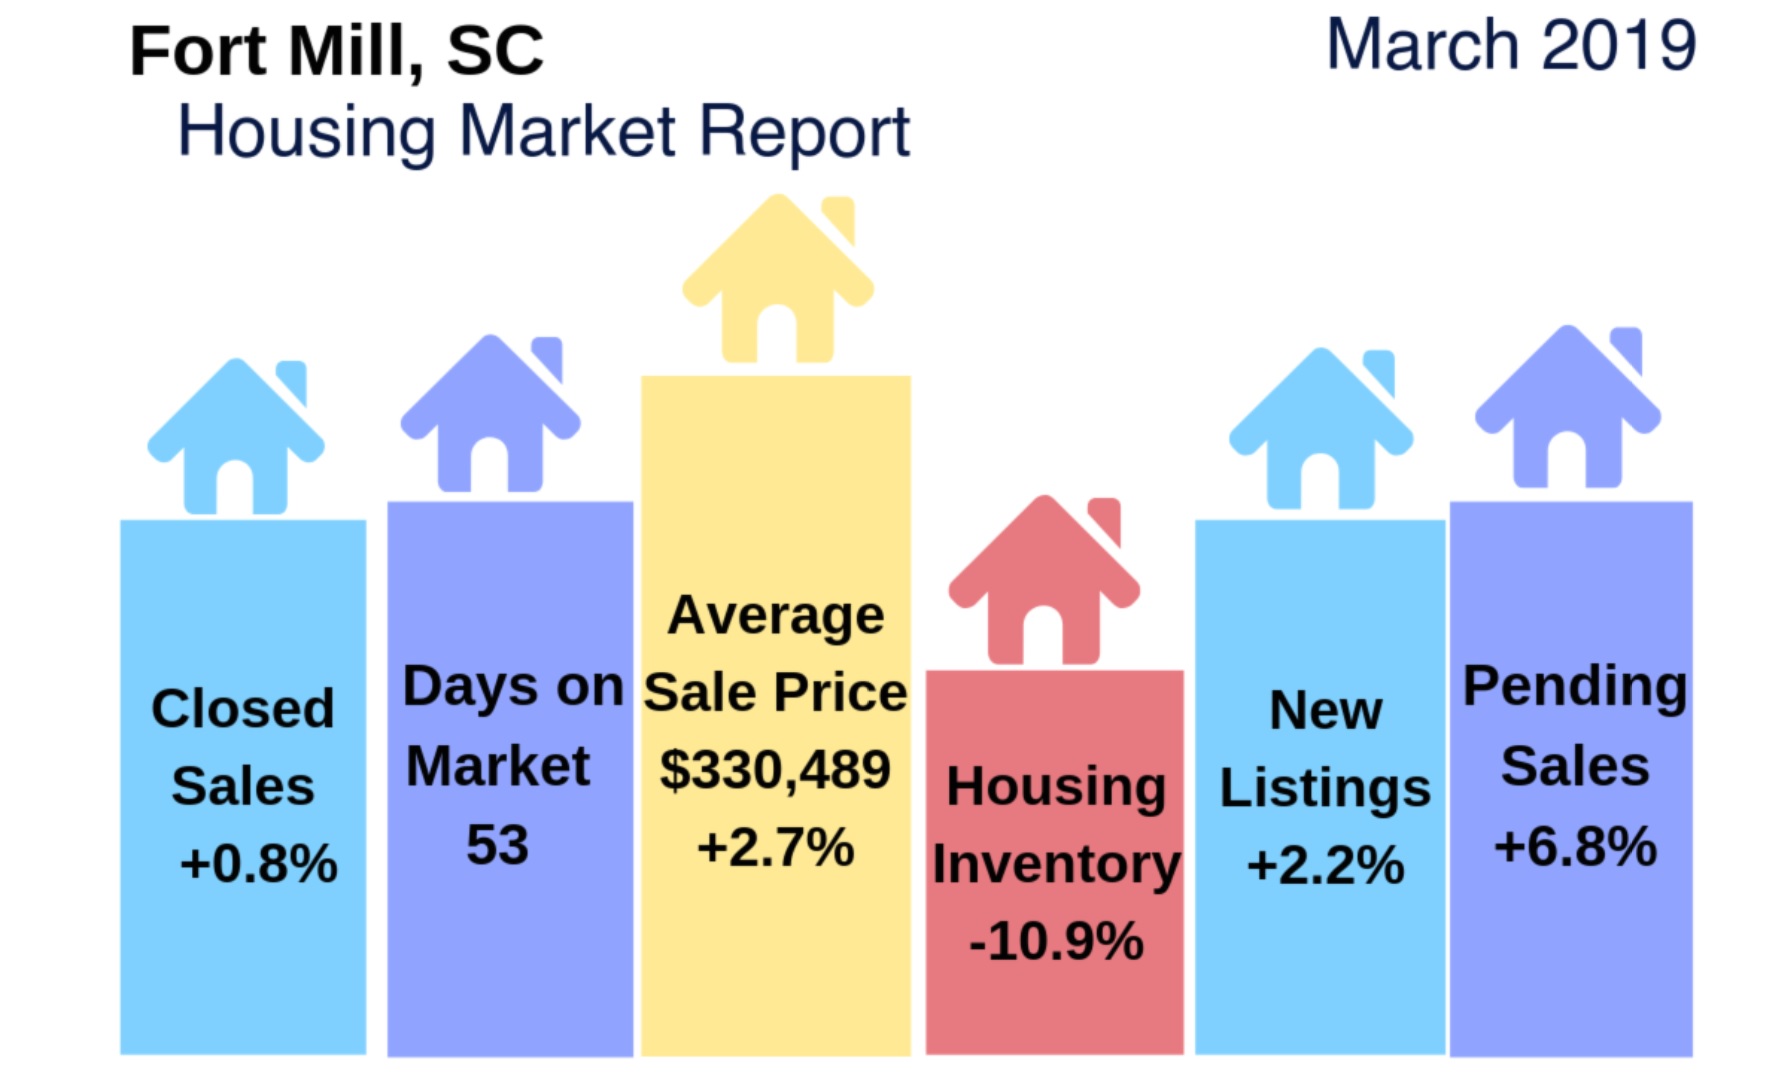 Fort Mill/Tega Cay Housing Markets: March 2019. How Did They Do?